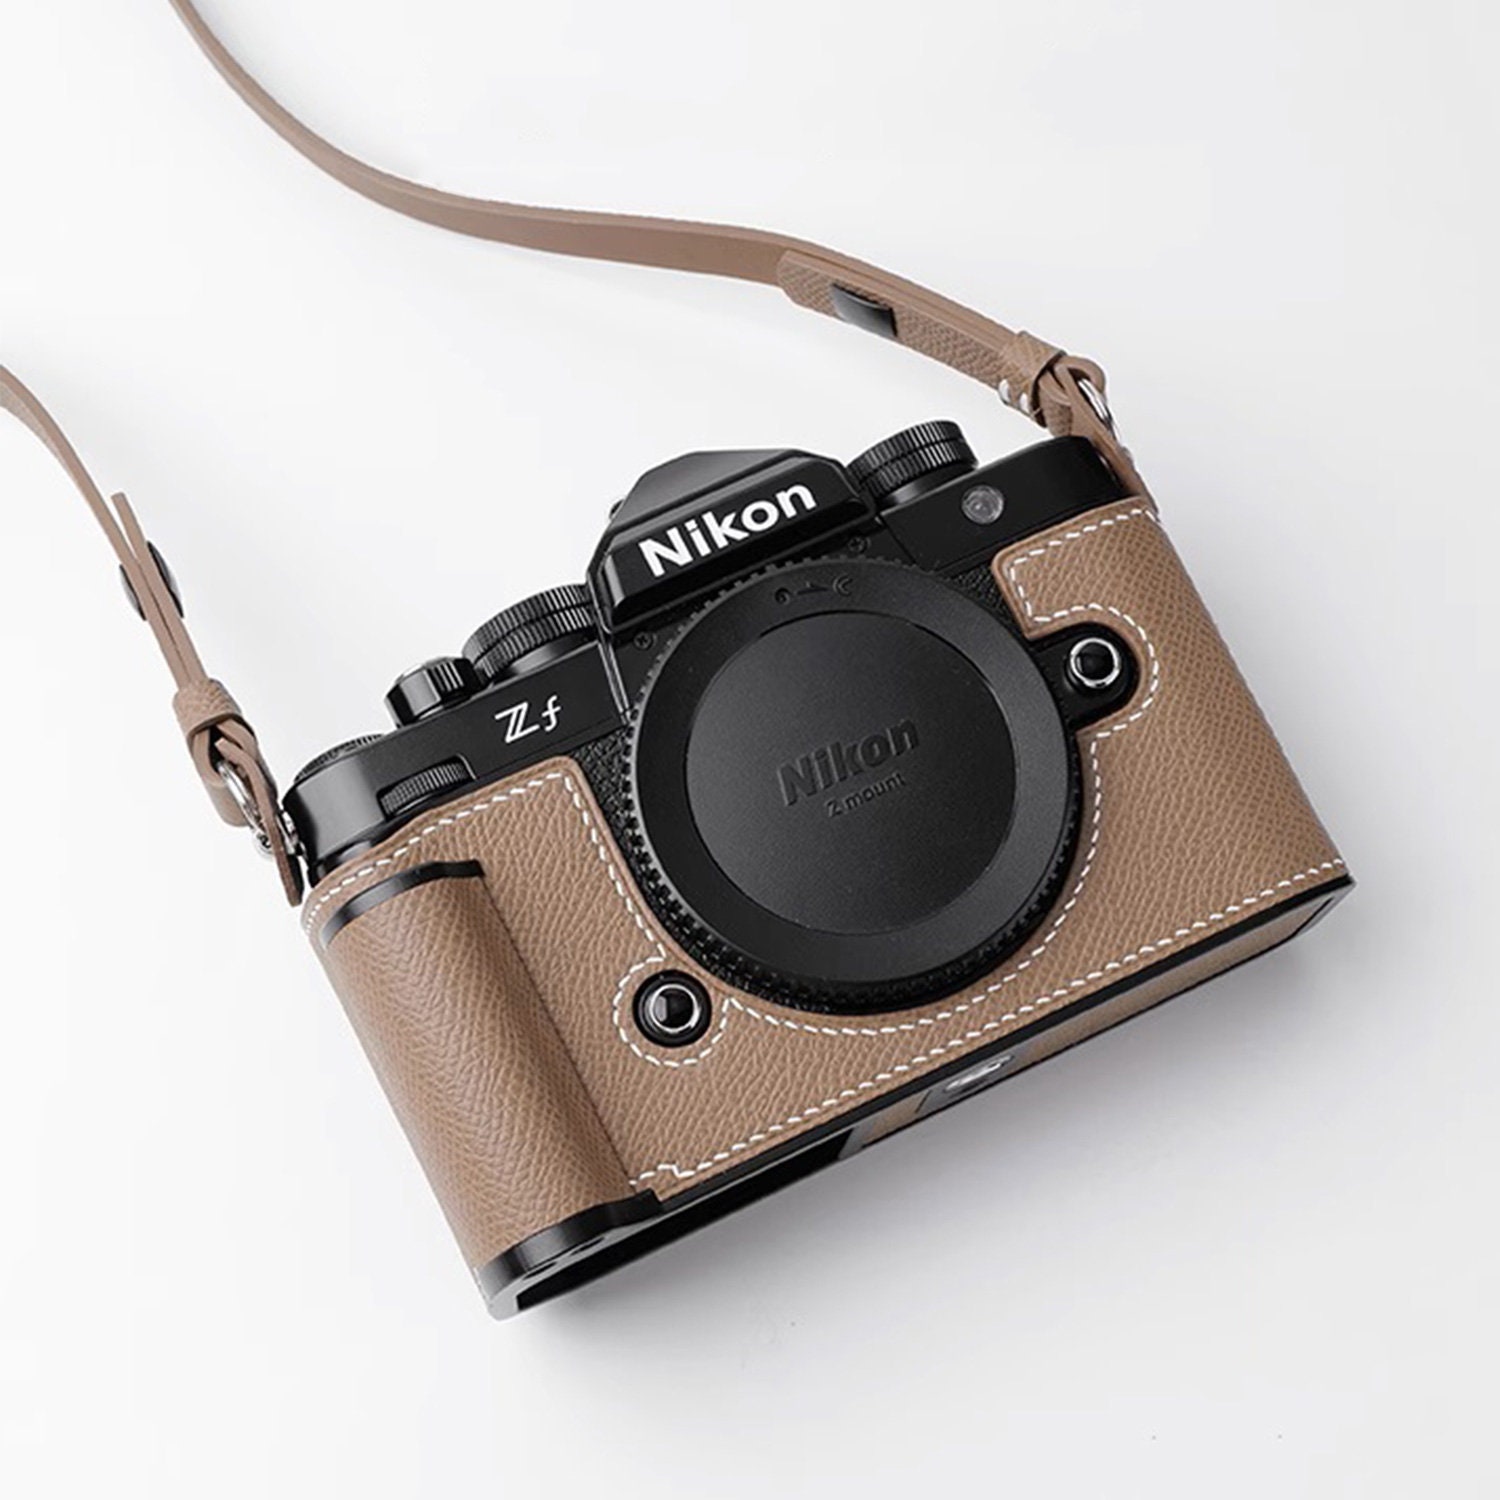 The Nikon Zf and Why Having a Personal Camera Can Be Worth the